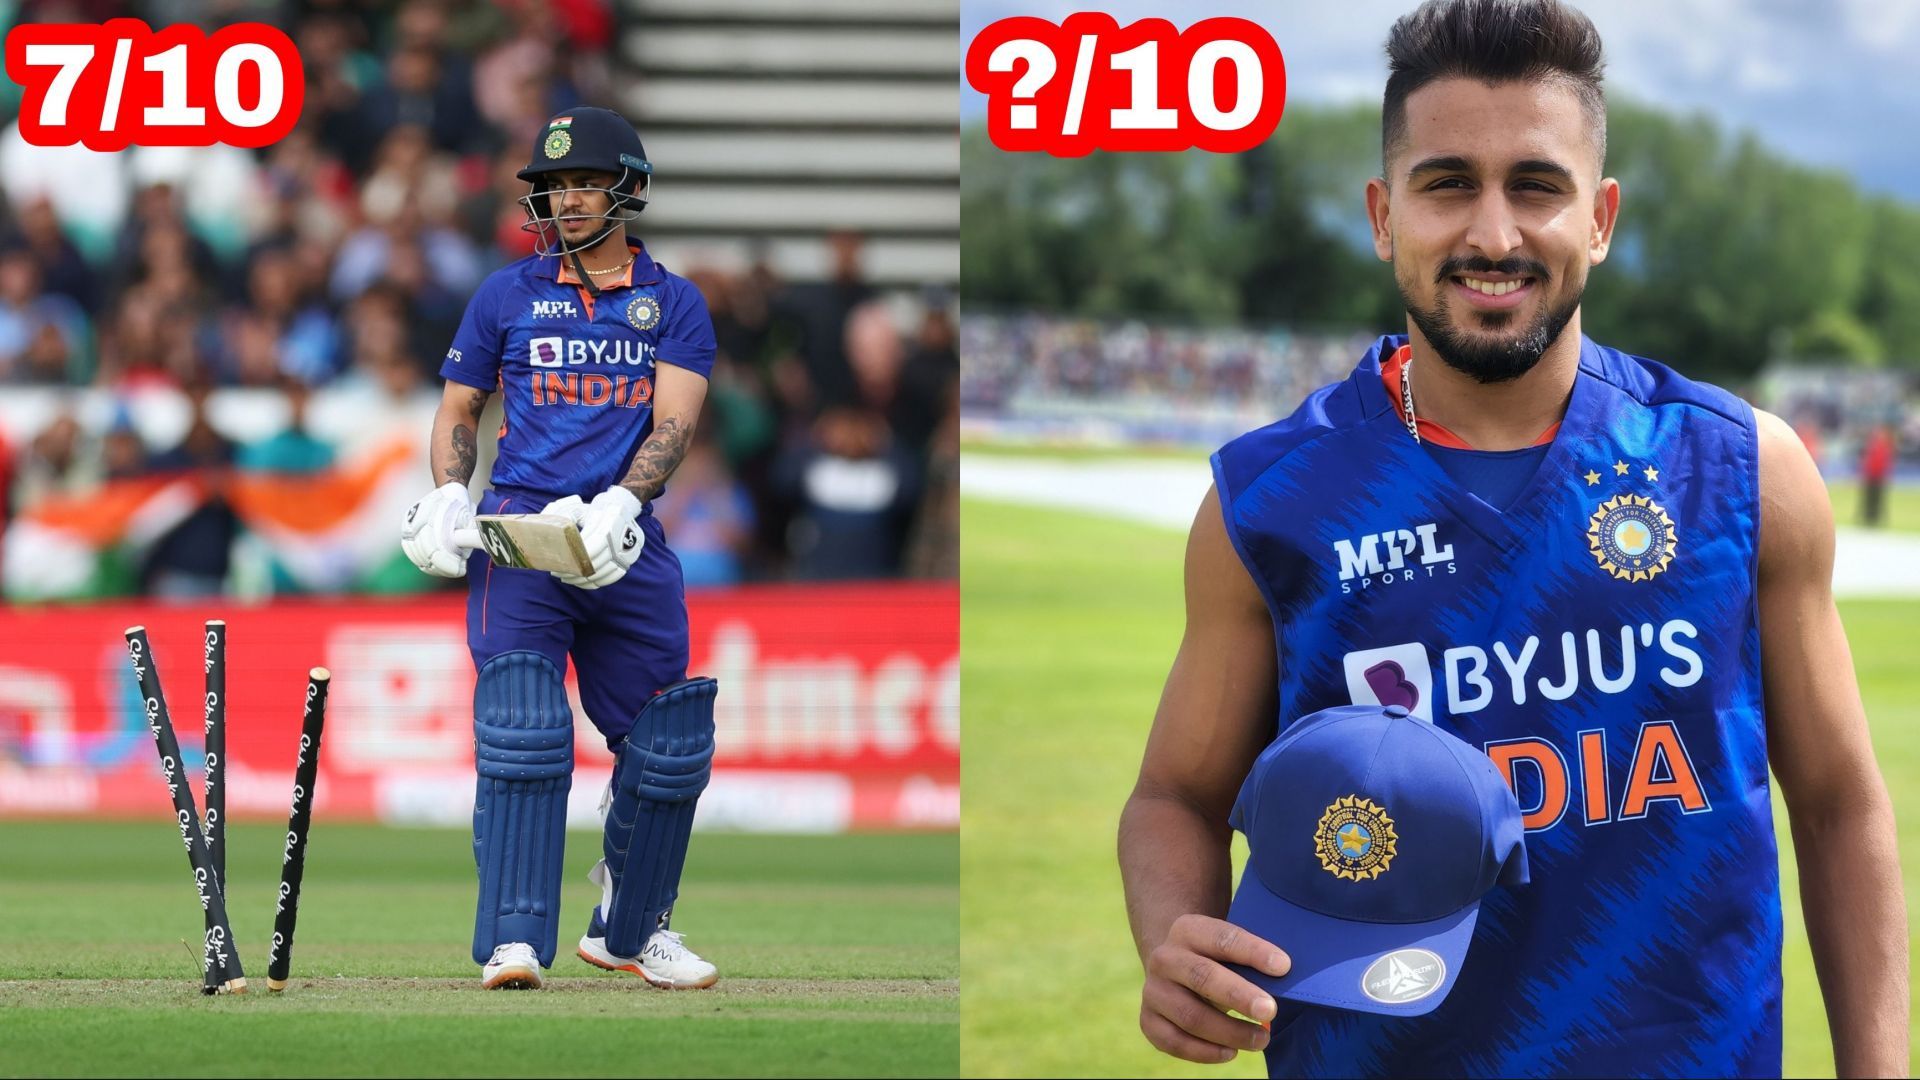 Ishan Kishan and Umran Malik had an opportunity to cement their place in the Indian T20I playing XI (Image Source: Twitter)